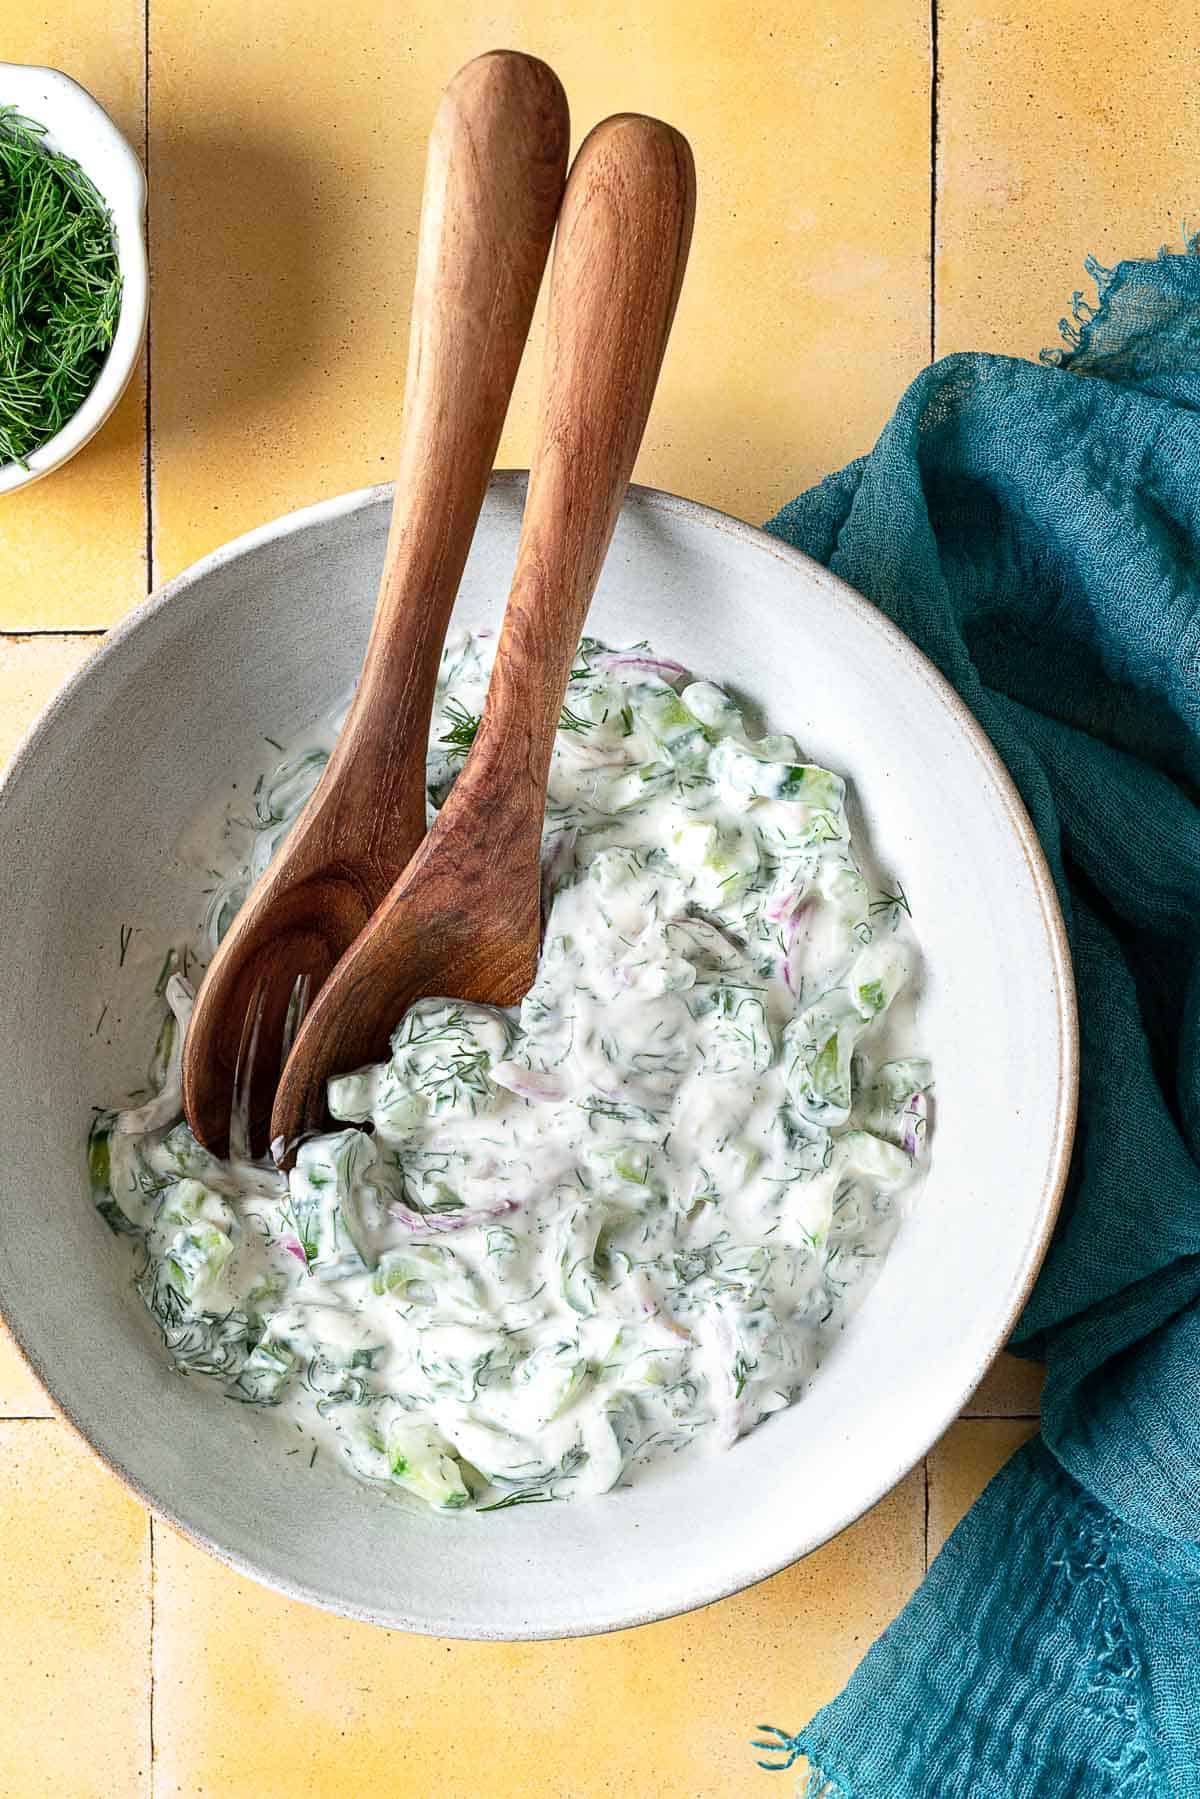 creamy cucumber salad in a serving bowl with wooden serving utensils next to a bowl of dill.